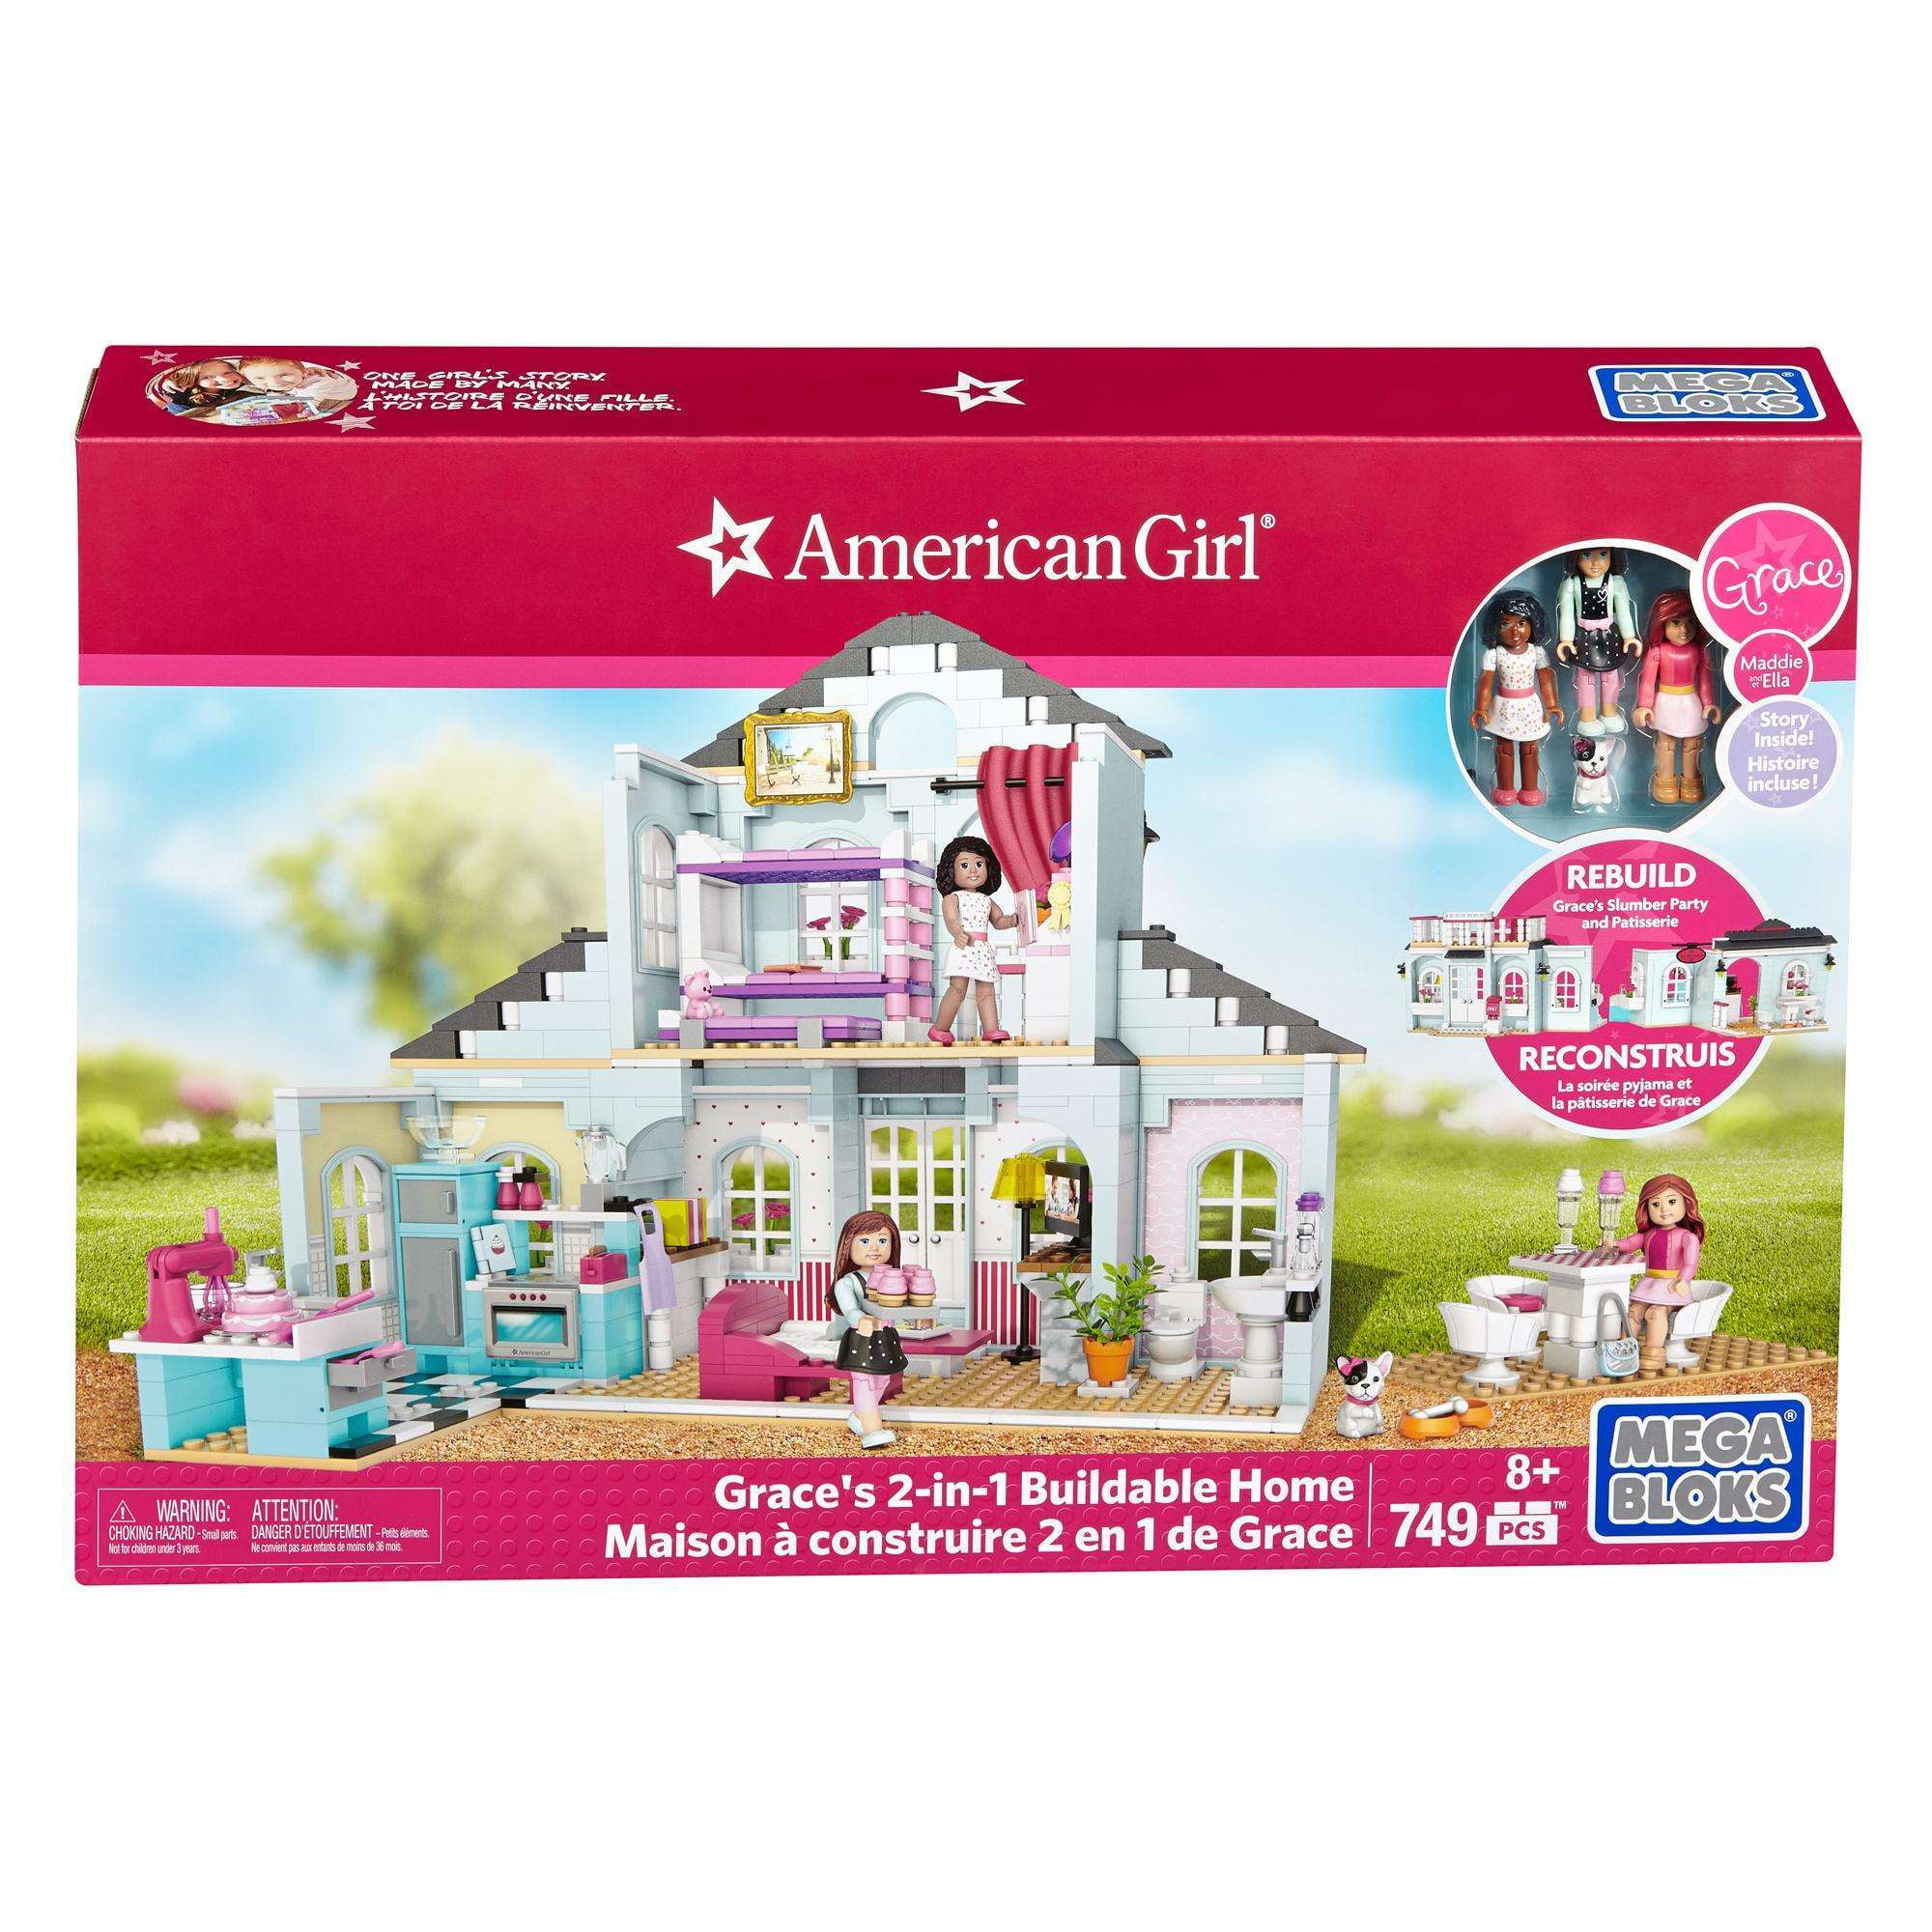 Mega Bloks 749 Pcs American Girl Grace 2in1 Buildable Home Party Doll House for sale online 